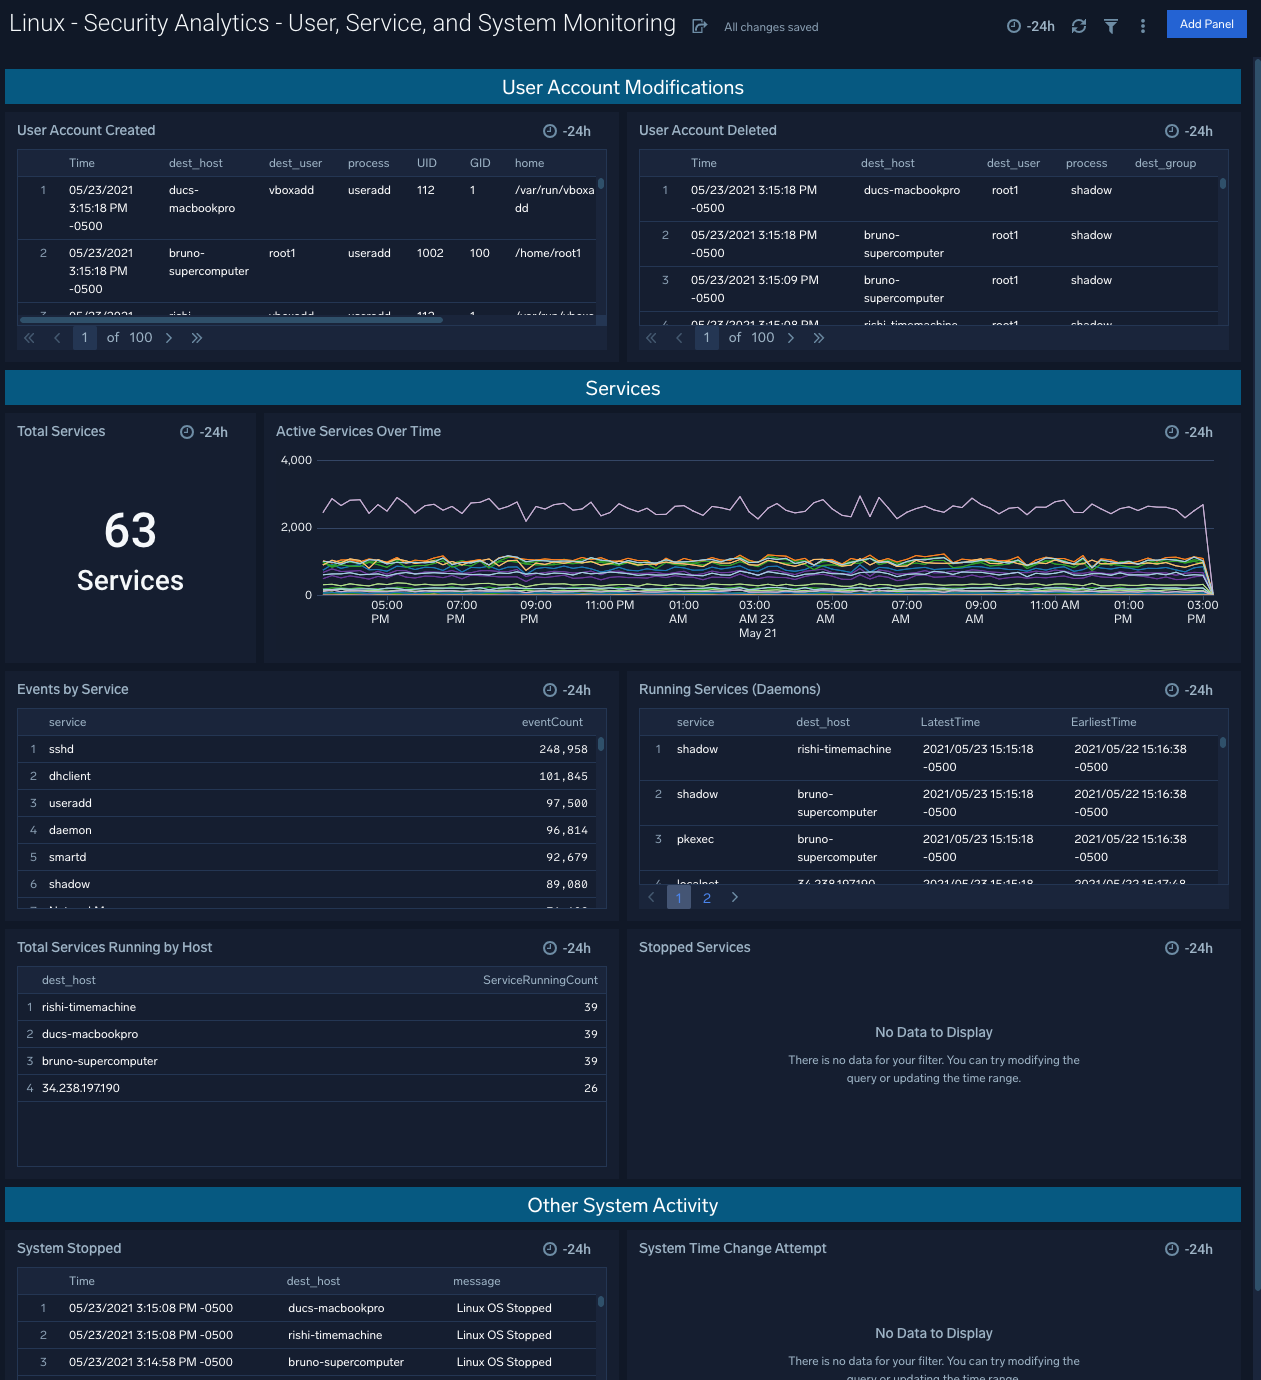 Linux Security dashboards